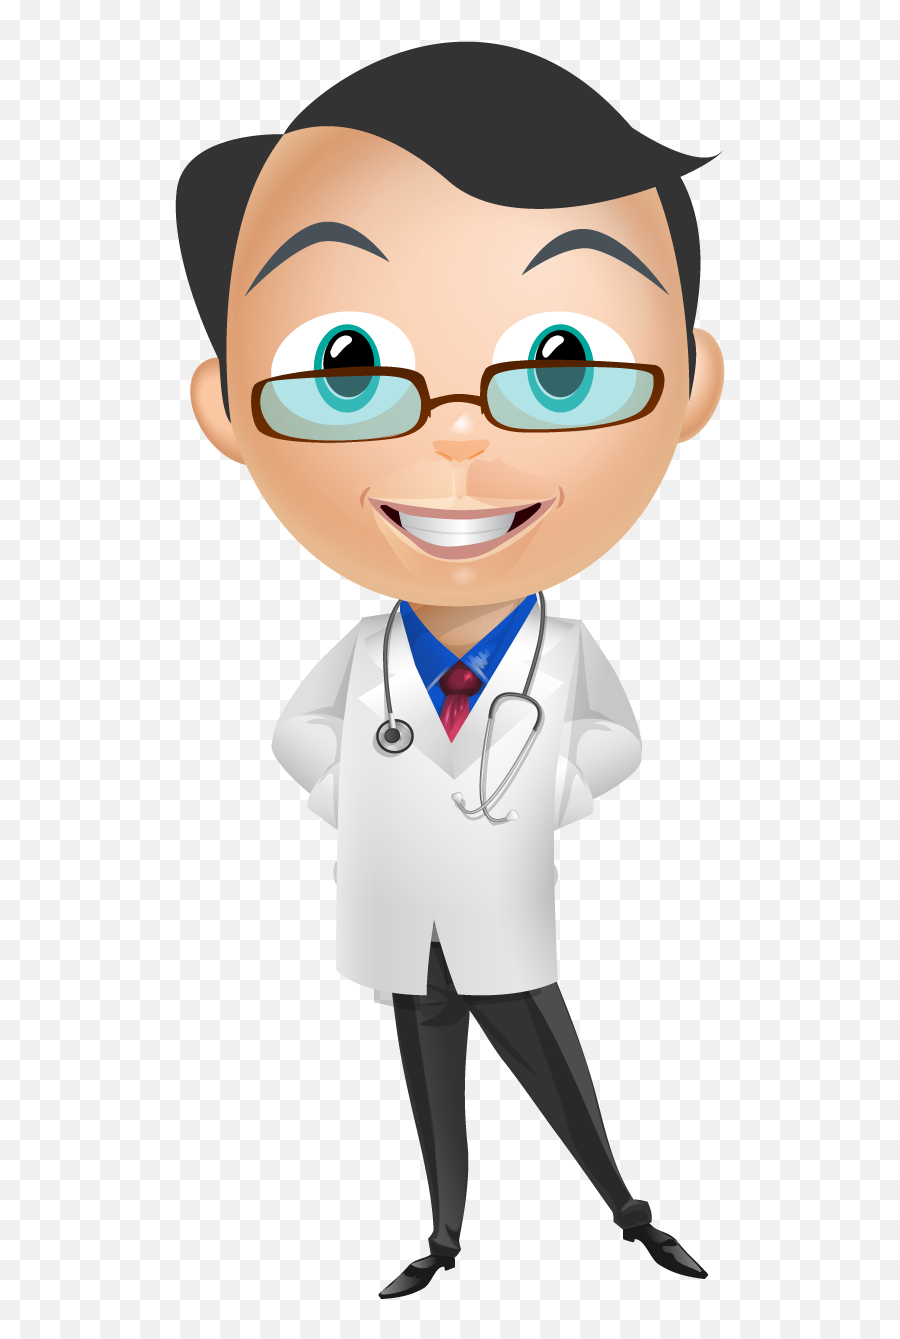 Physician Woman Clip Art - Cartoon Family Female Doctor Png Animated Transparent Background Doctor Emoji,Female Doctor Emoji